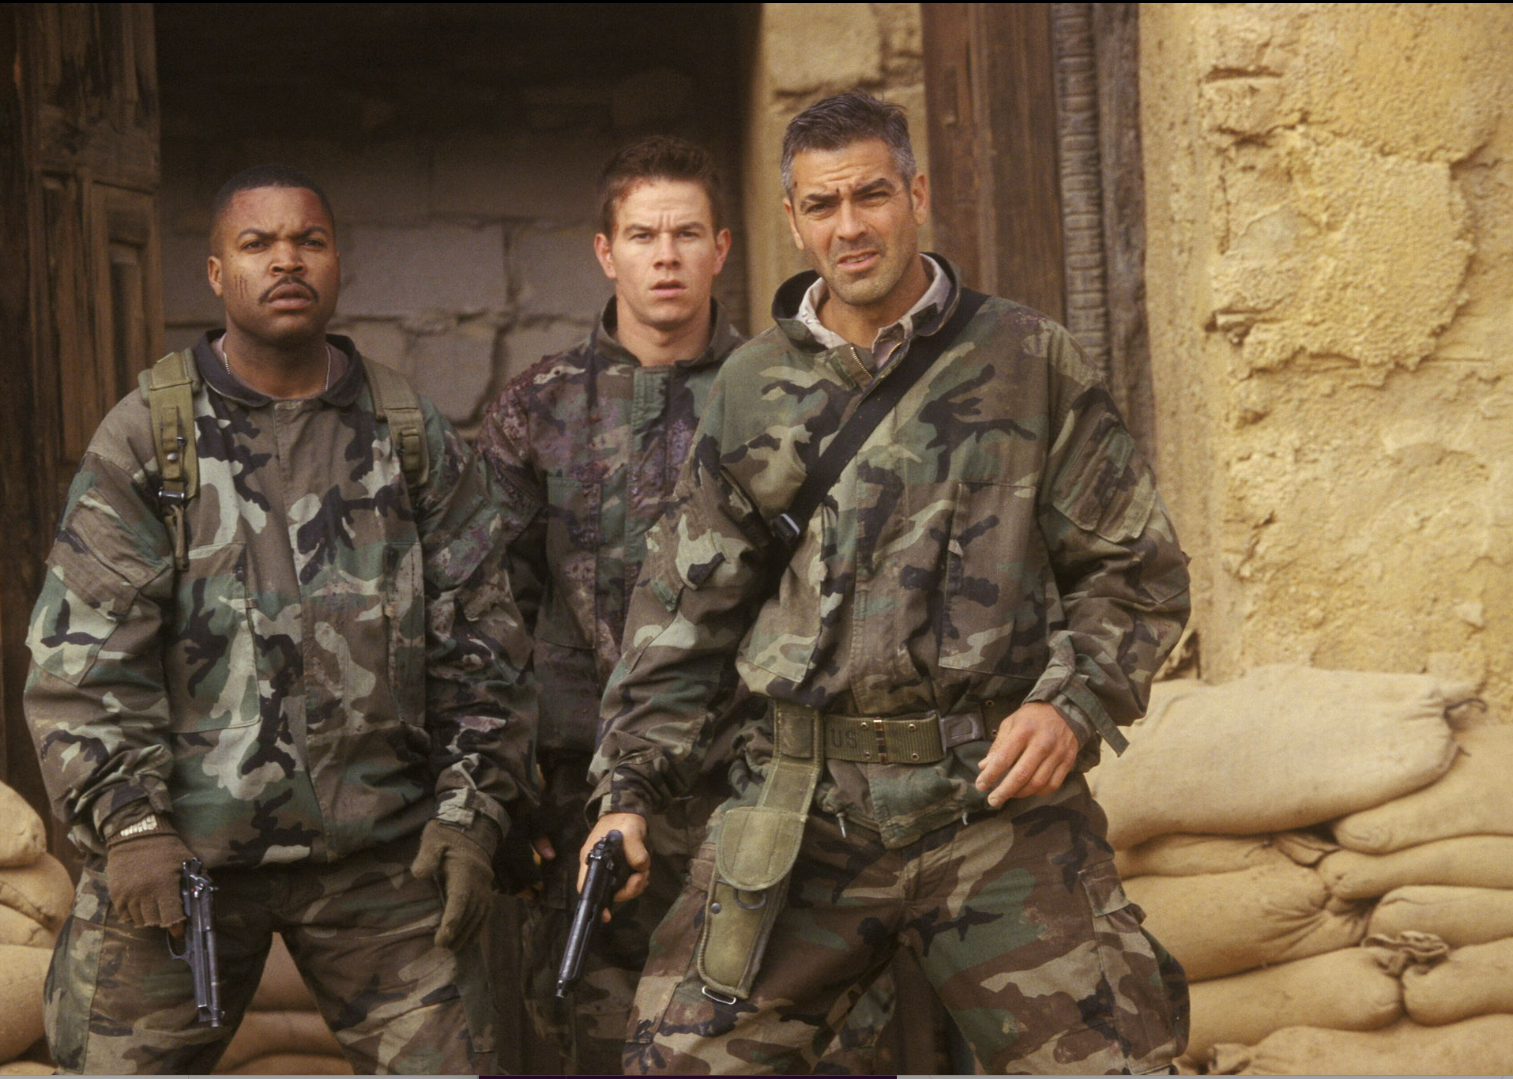 George Clooney, Mark Wahlberg, and Ice Cube in "Three Kings"